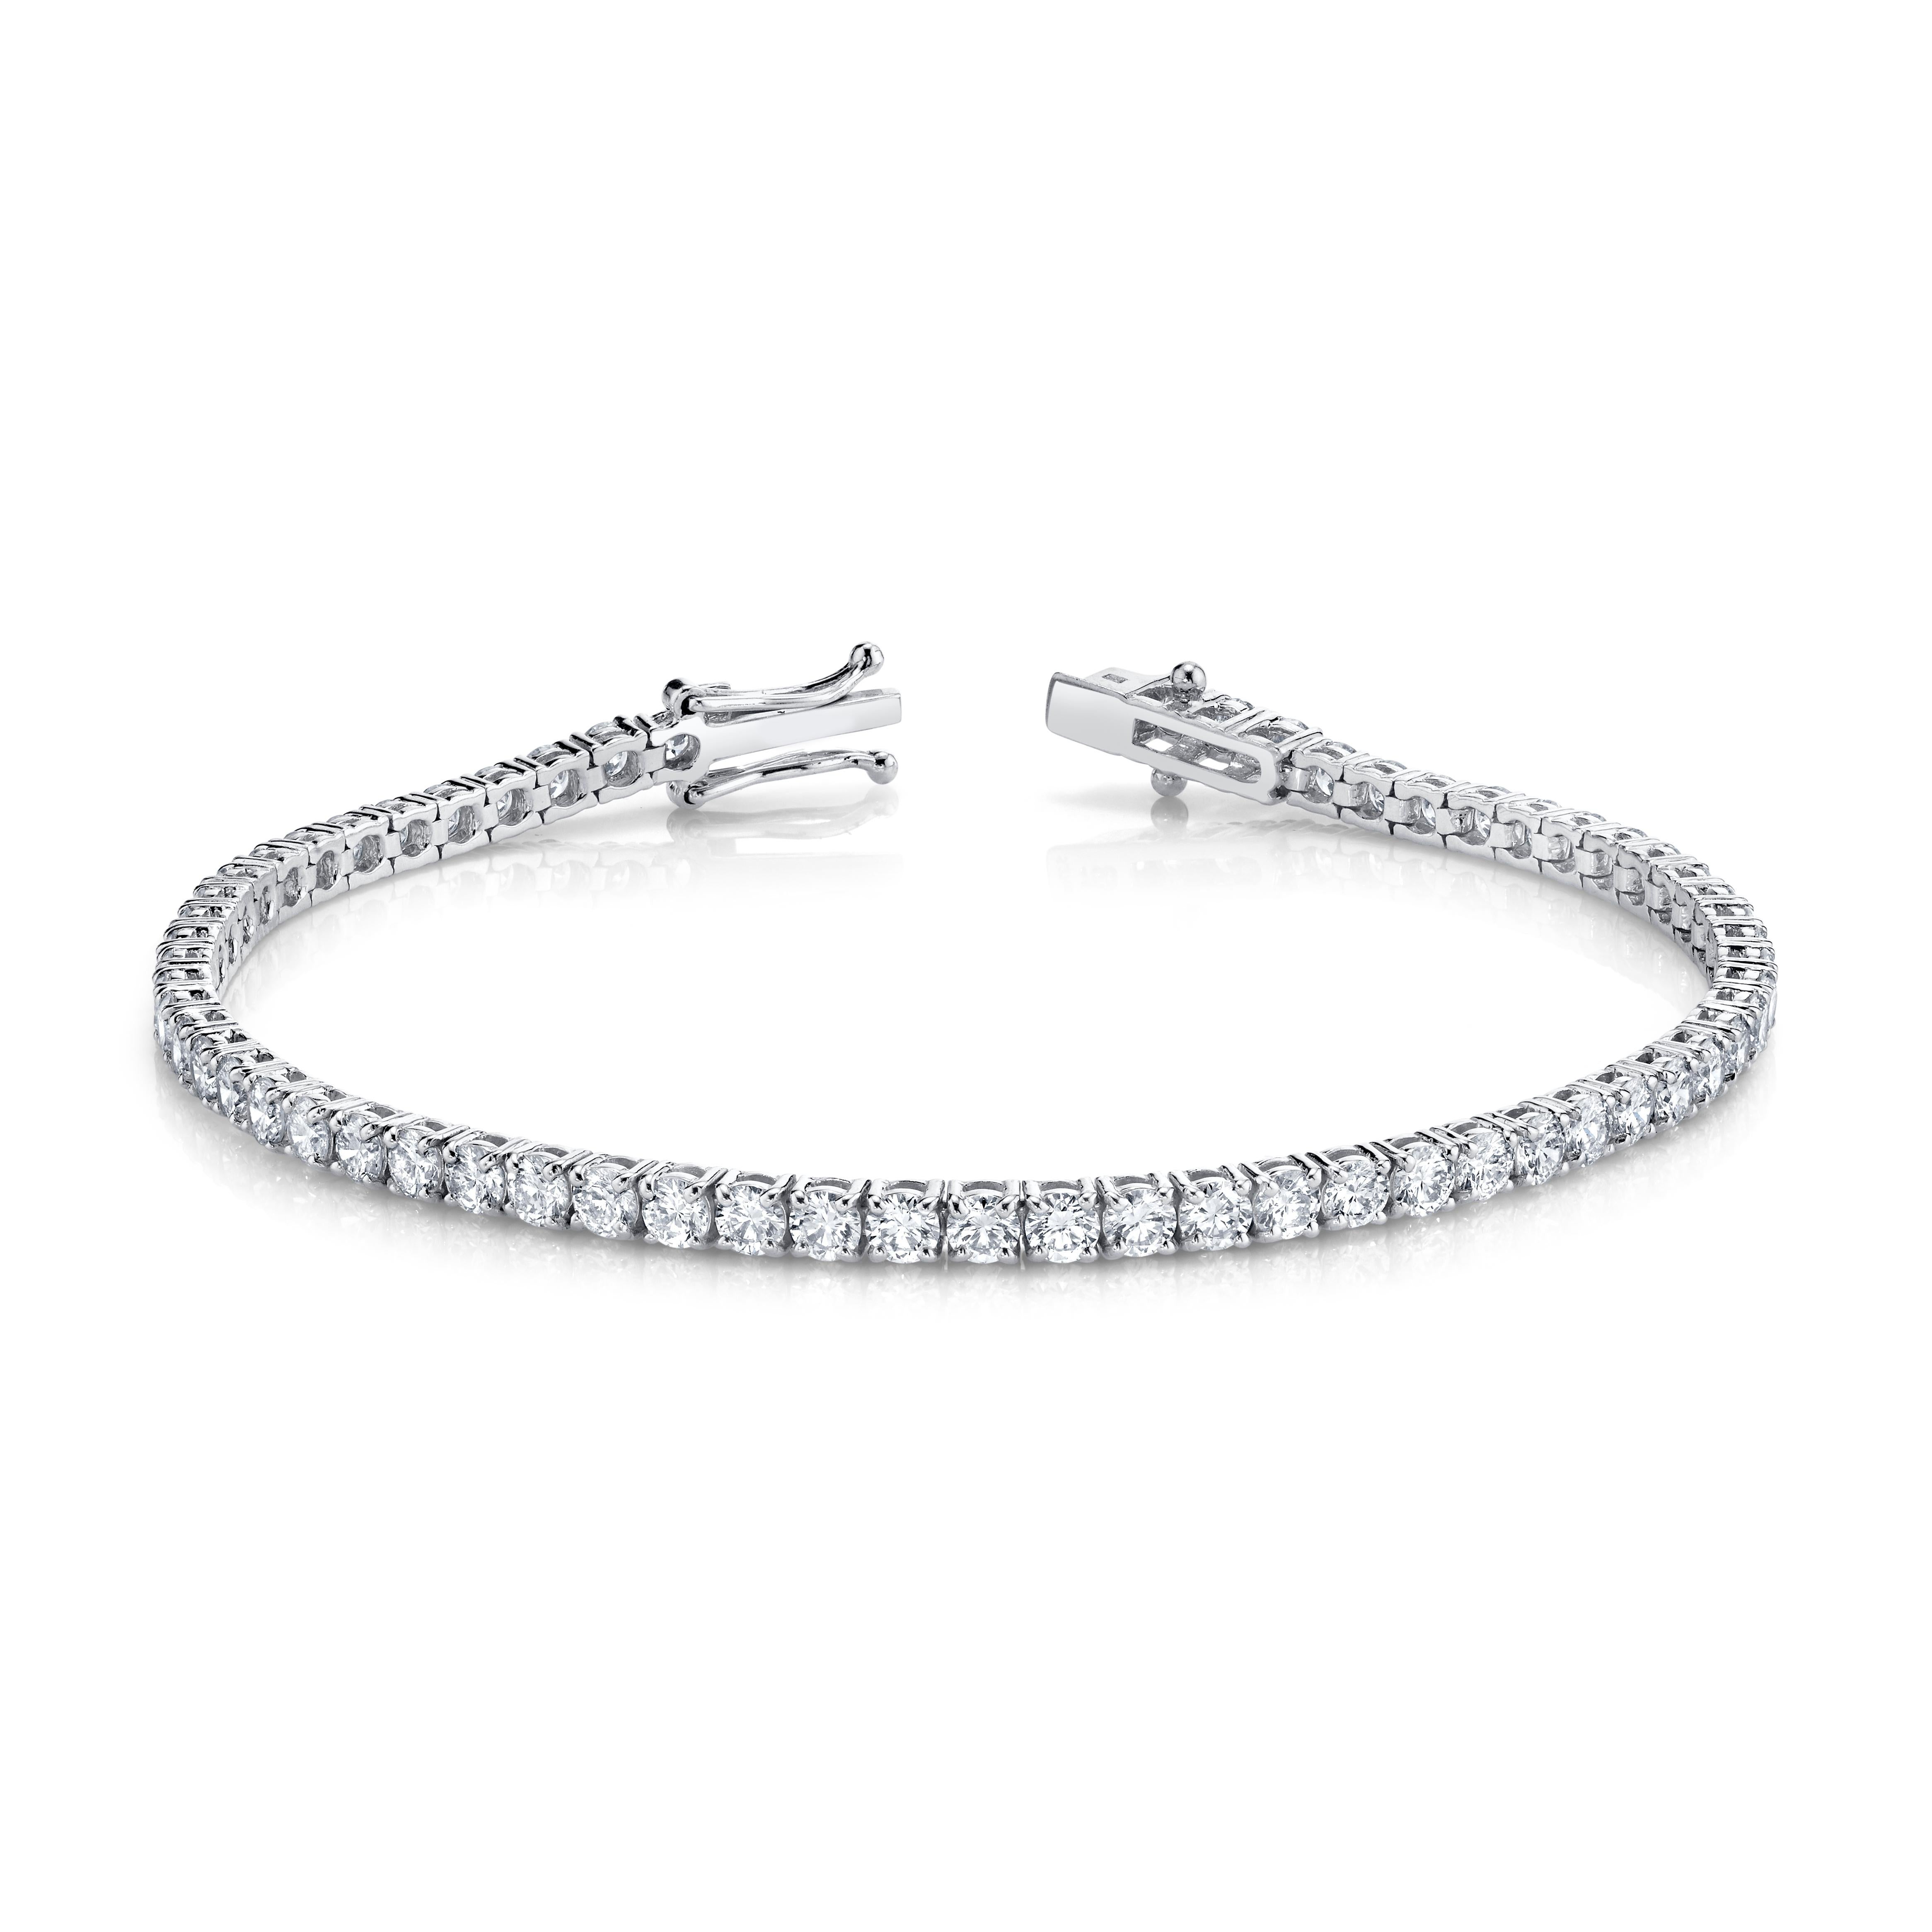 5.47 carat total weight, 62 Round Brilliant Diamonds set in 4-prong 18k white gold bracelet
Approximate Color H - I  Clarity VS - SI
Also, available in yellow gold and rose gold.
